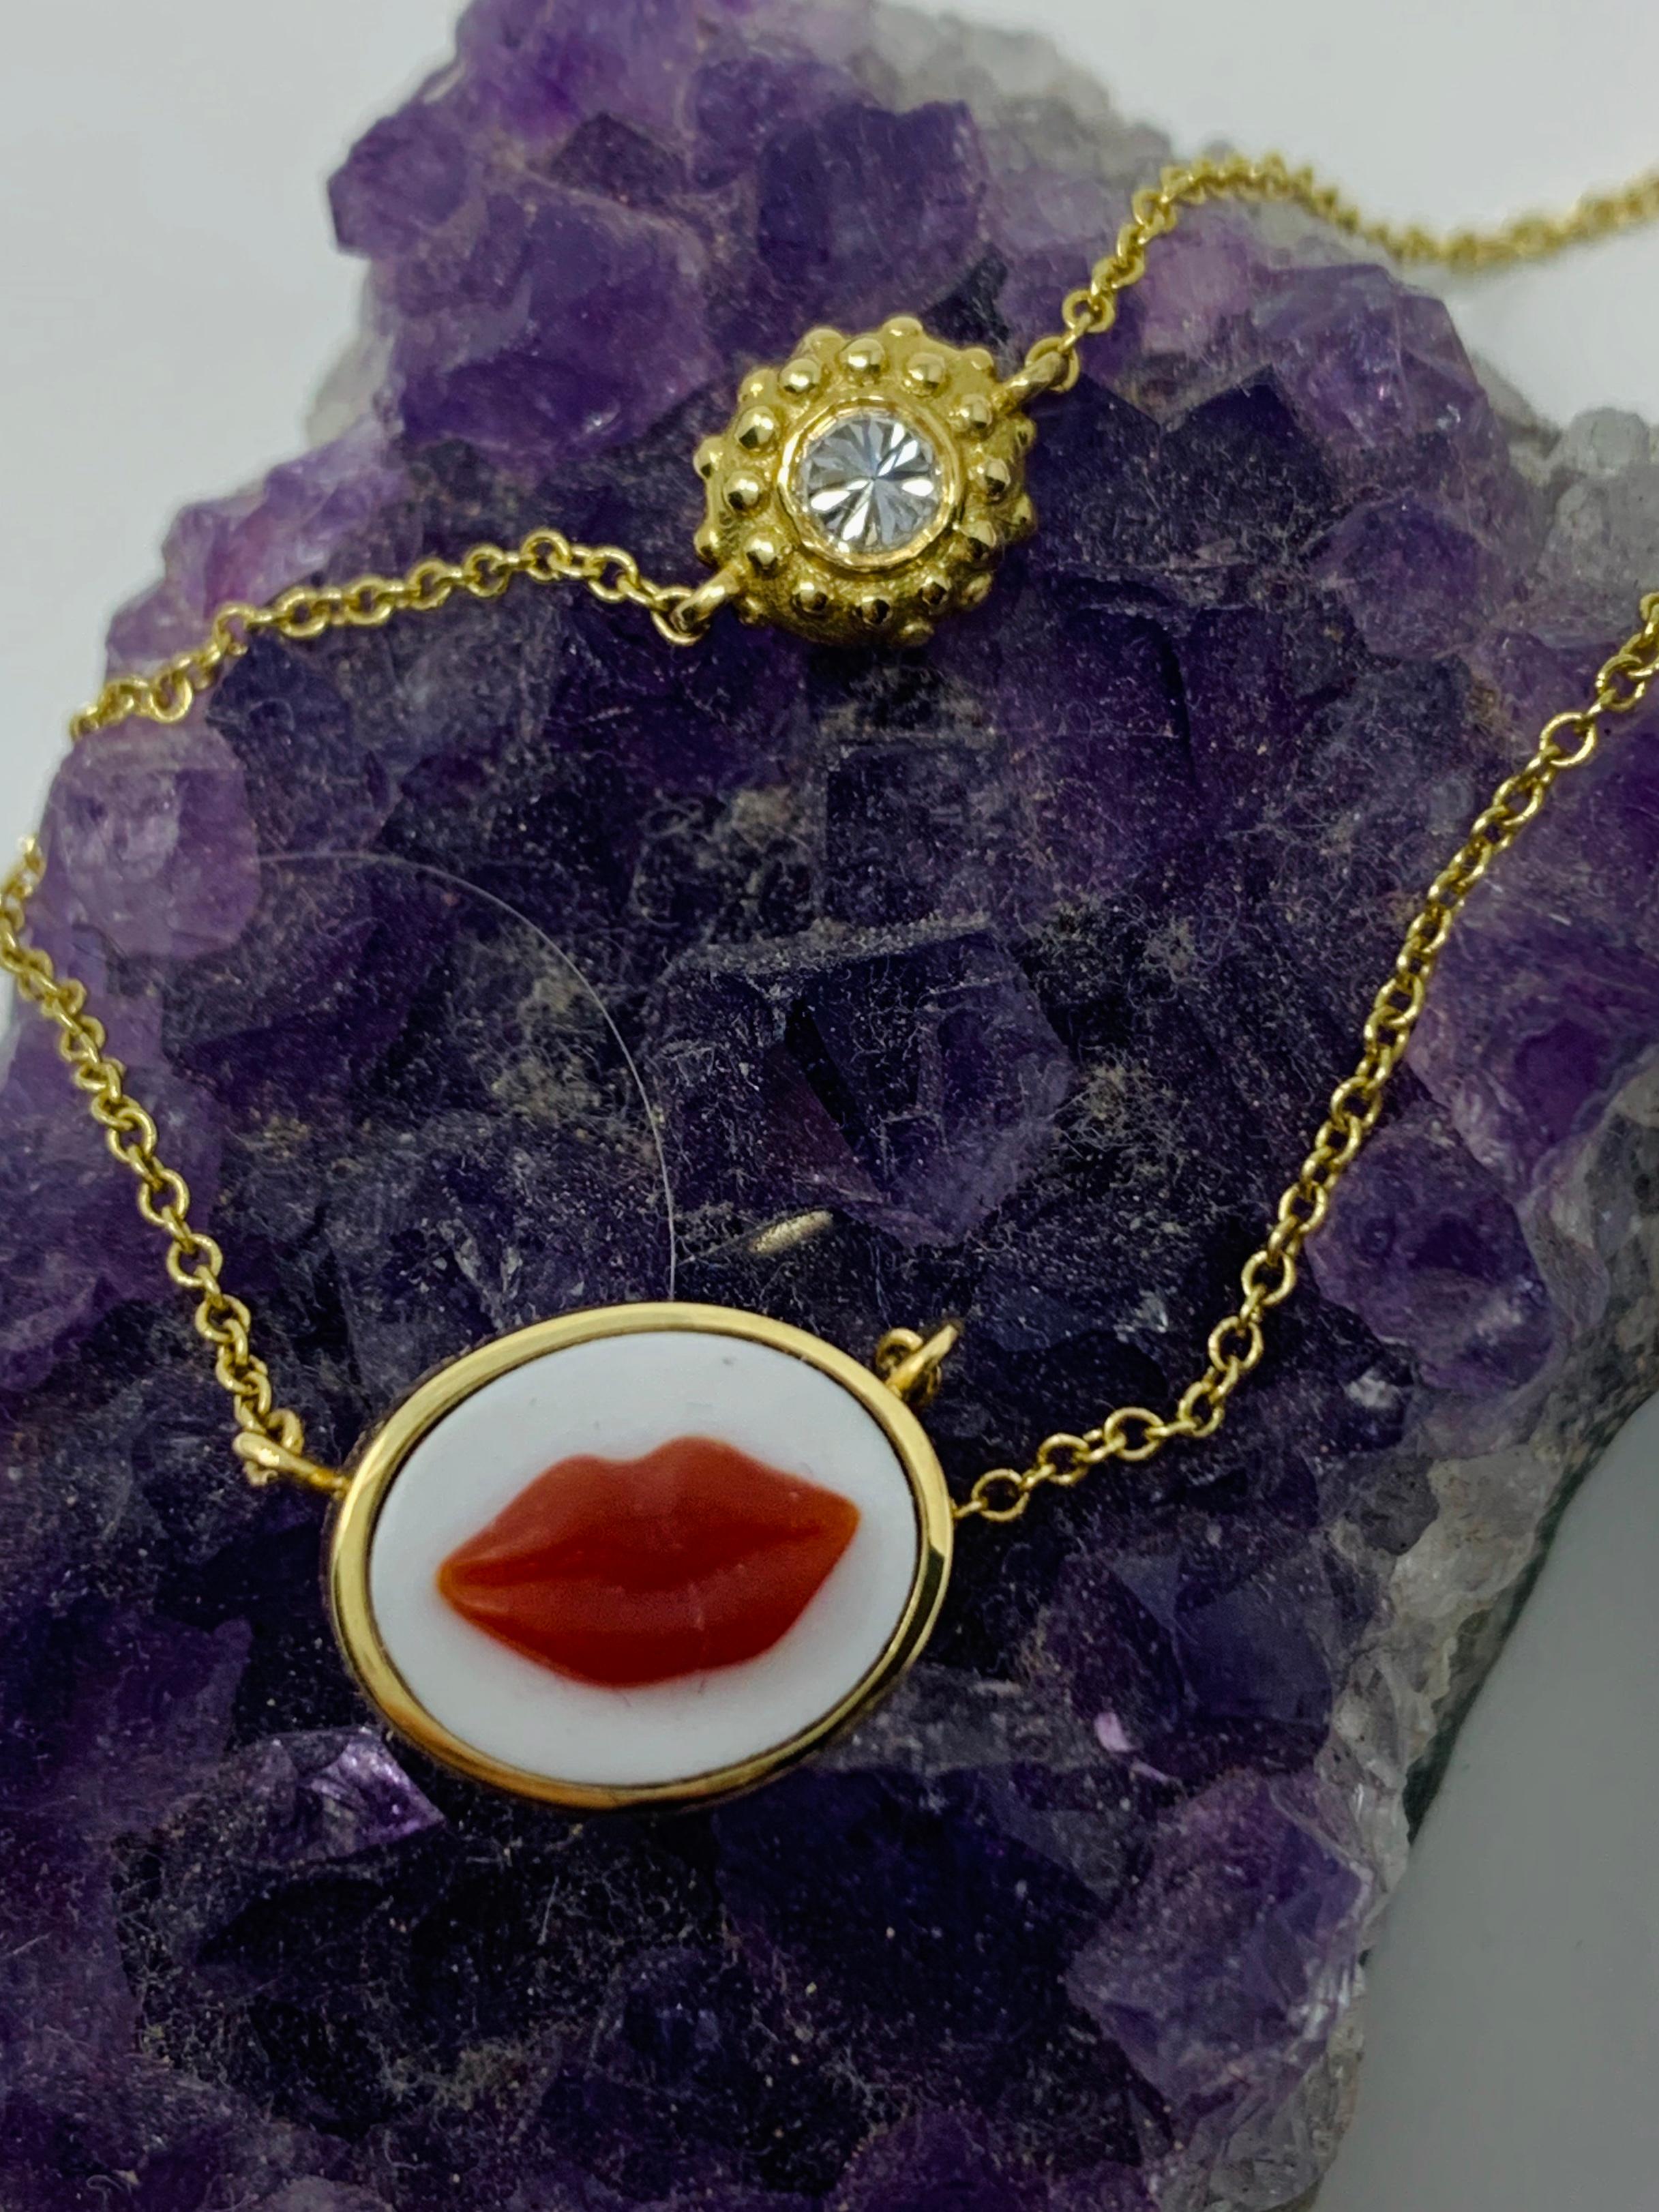 'Lady is a Tramp' cameo charm bracelet is a work of art! The cameo is hand carved in Brazilian red agate and encircled in 18k rose gold.  A sea urchin is set with an inverted diamond that sits in the chain to the right of the lip cameo. The ajure